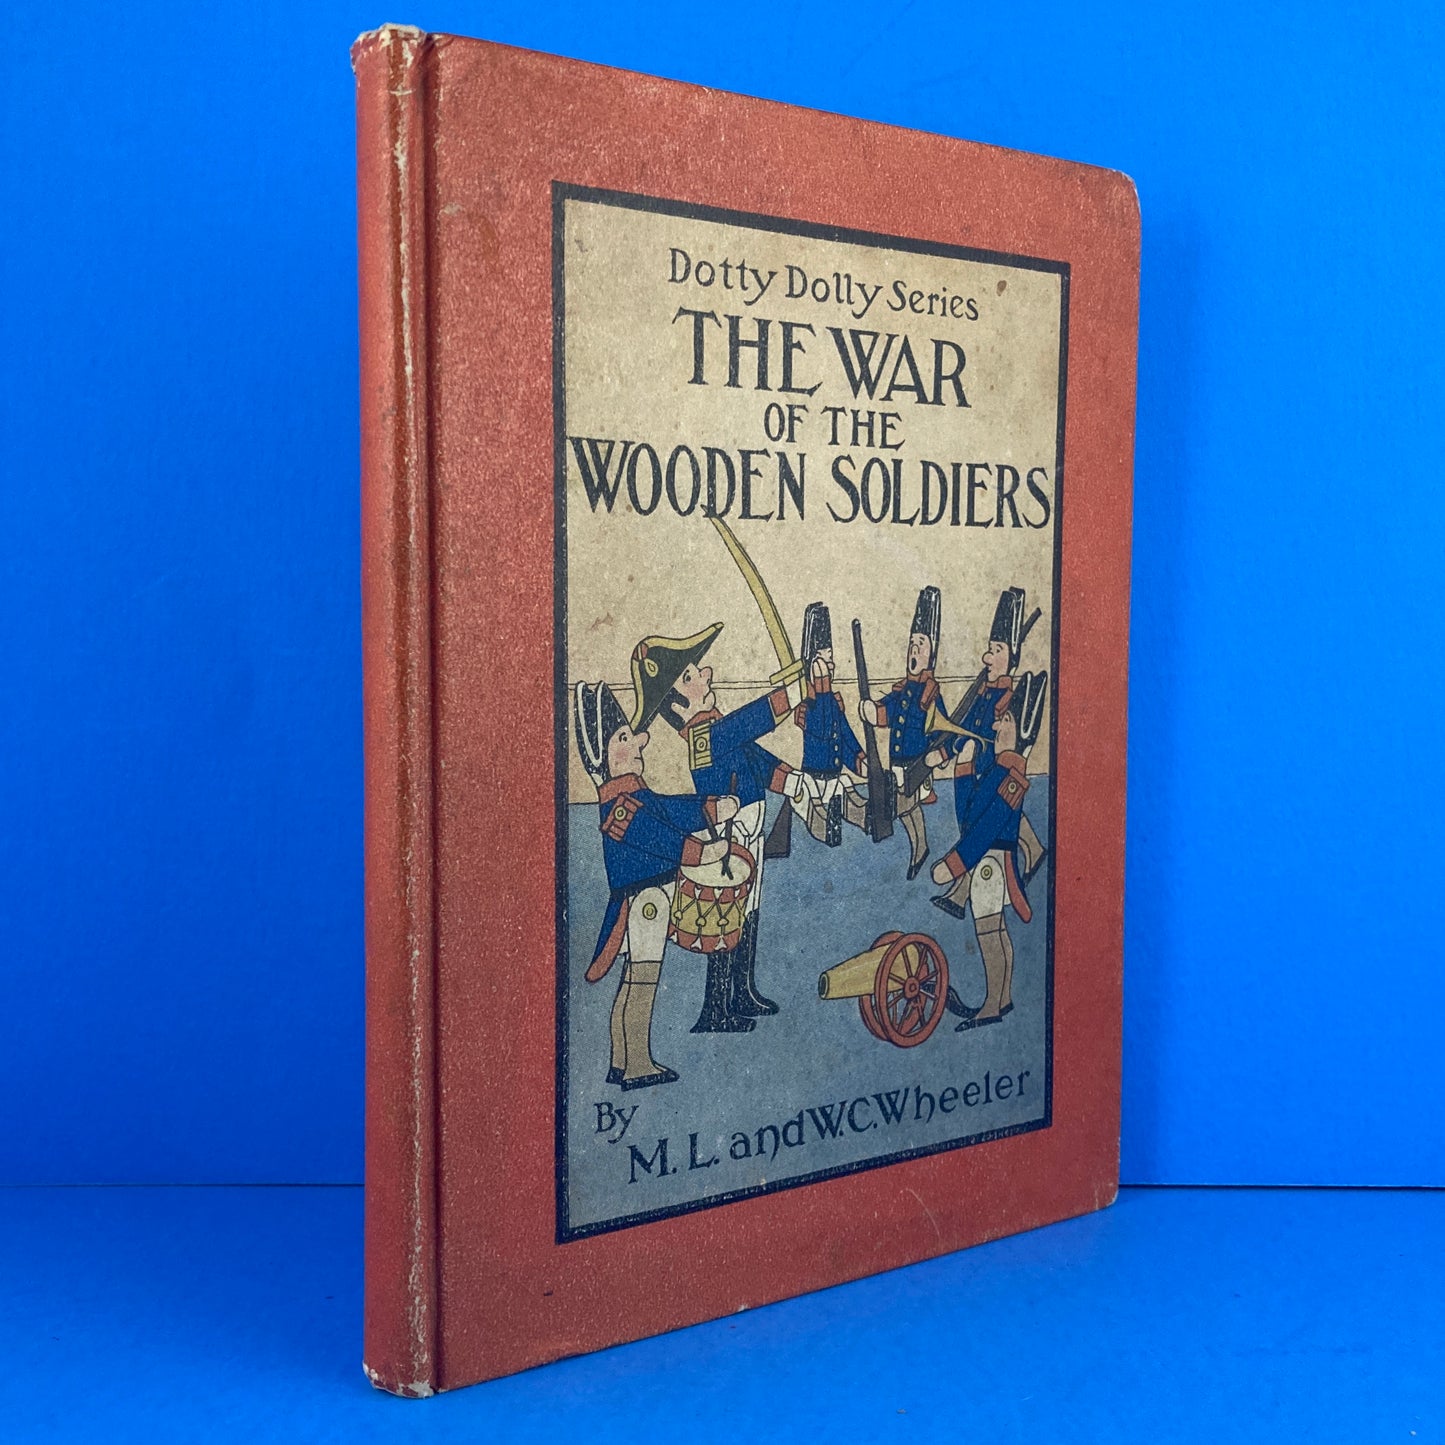 The War of the Wooden Soldiers